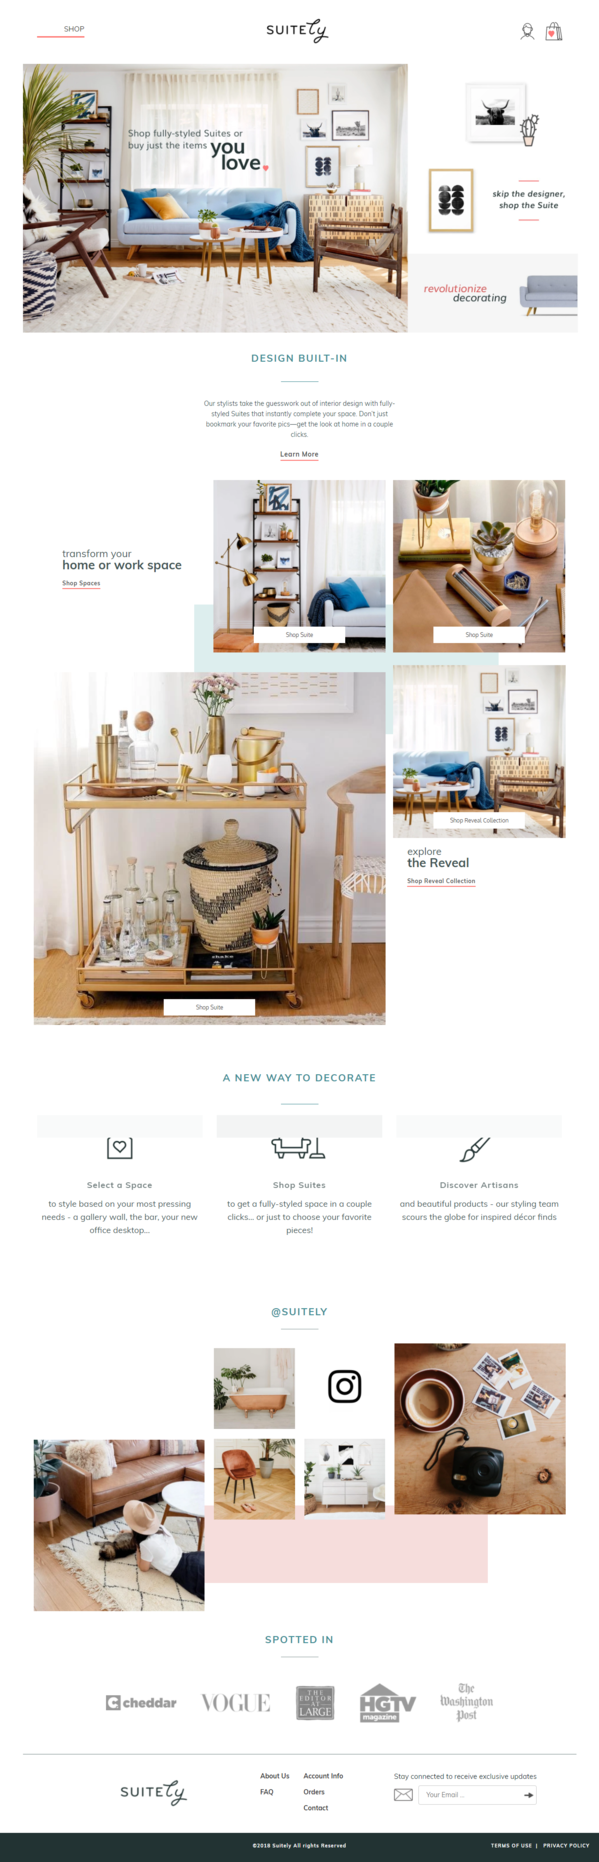 Suitely - Shop fully-styled decor suites to elevate your space - suitely.com.png